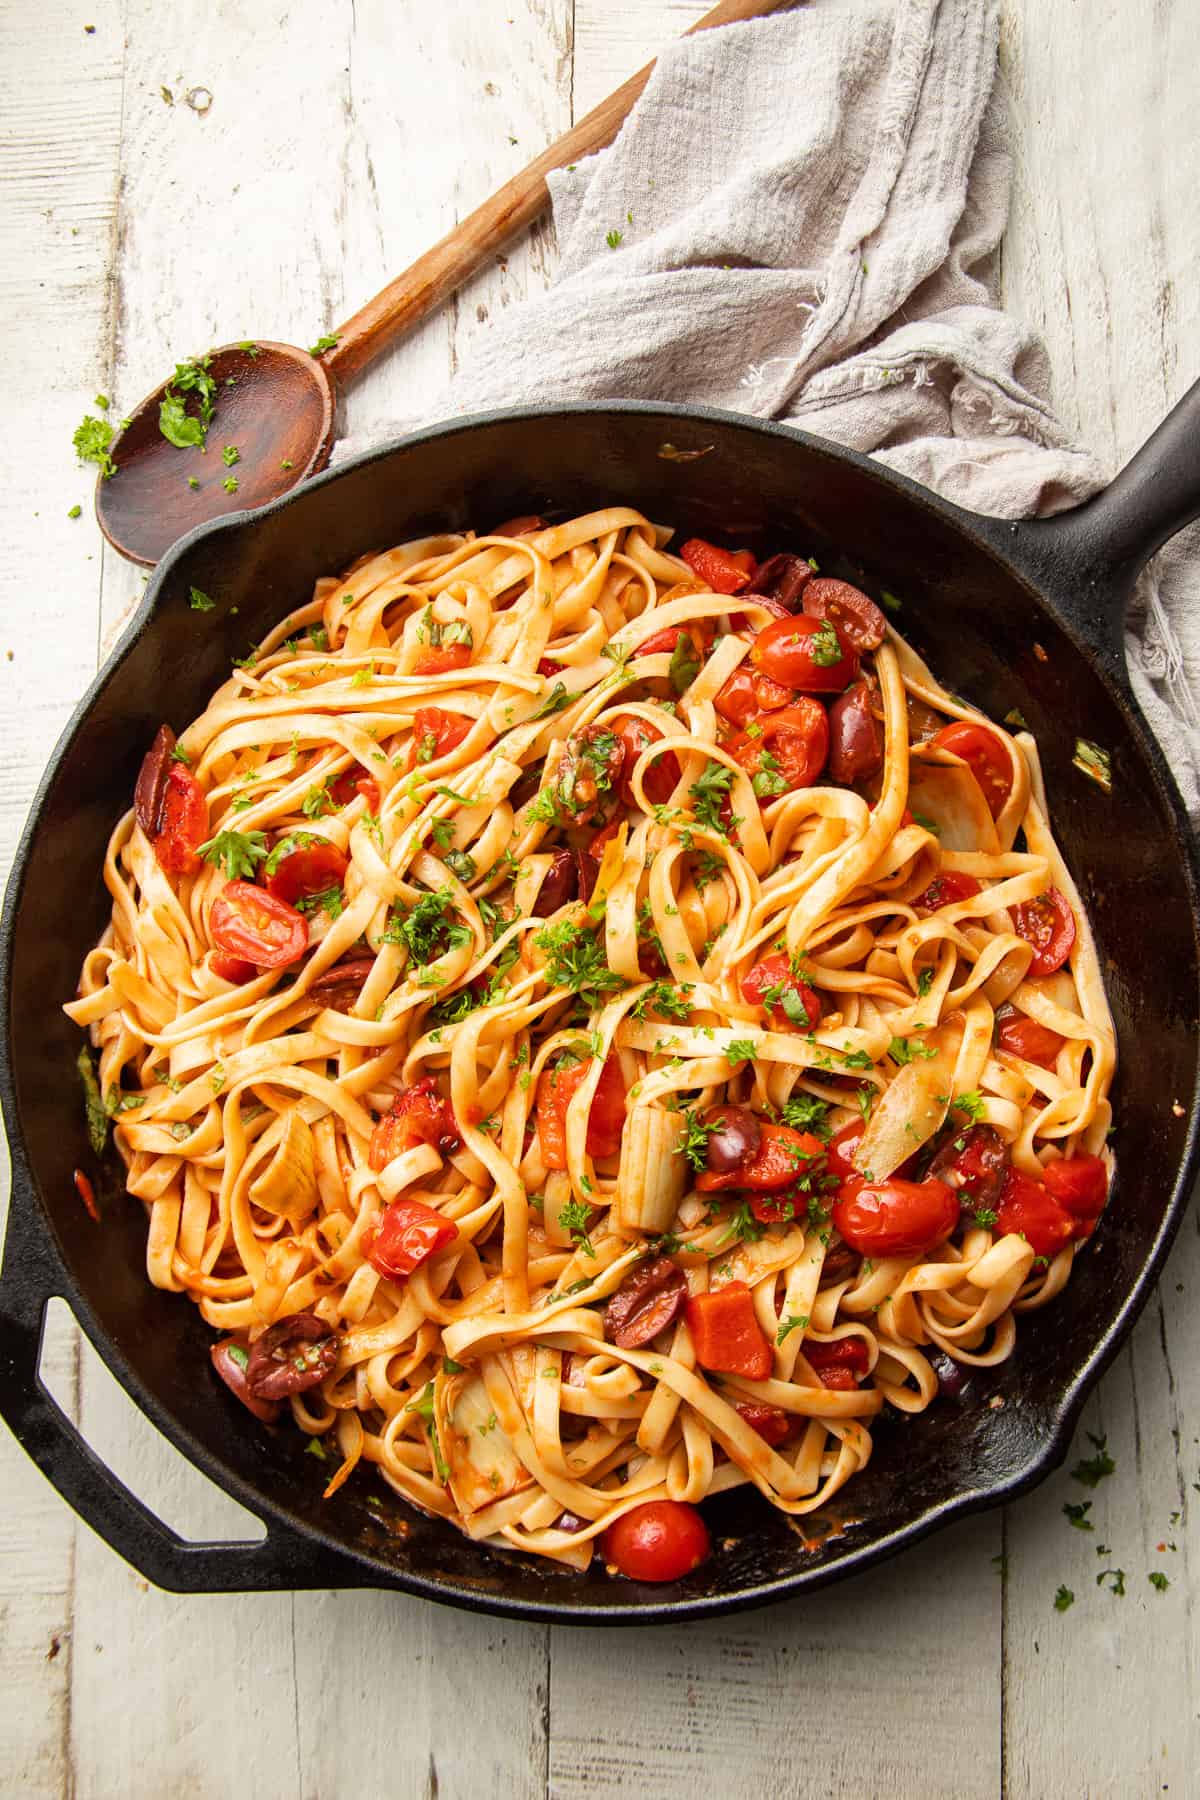 Skillet of Mediterranean Pasta with wooden spoon on the side.